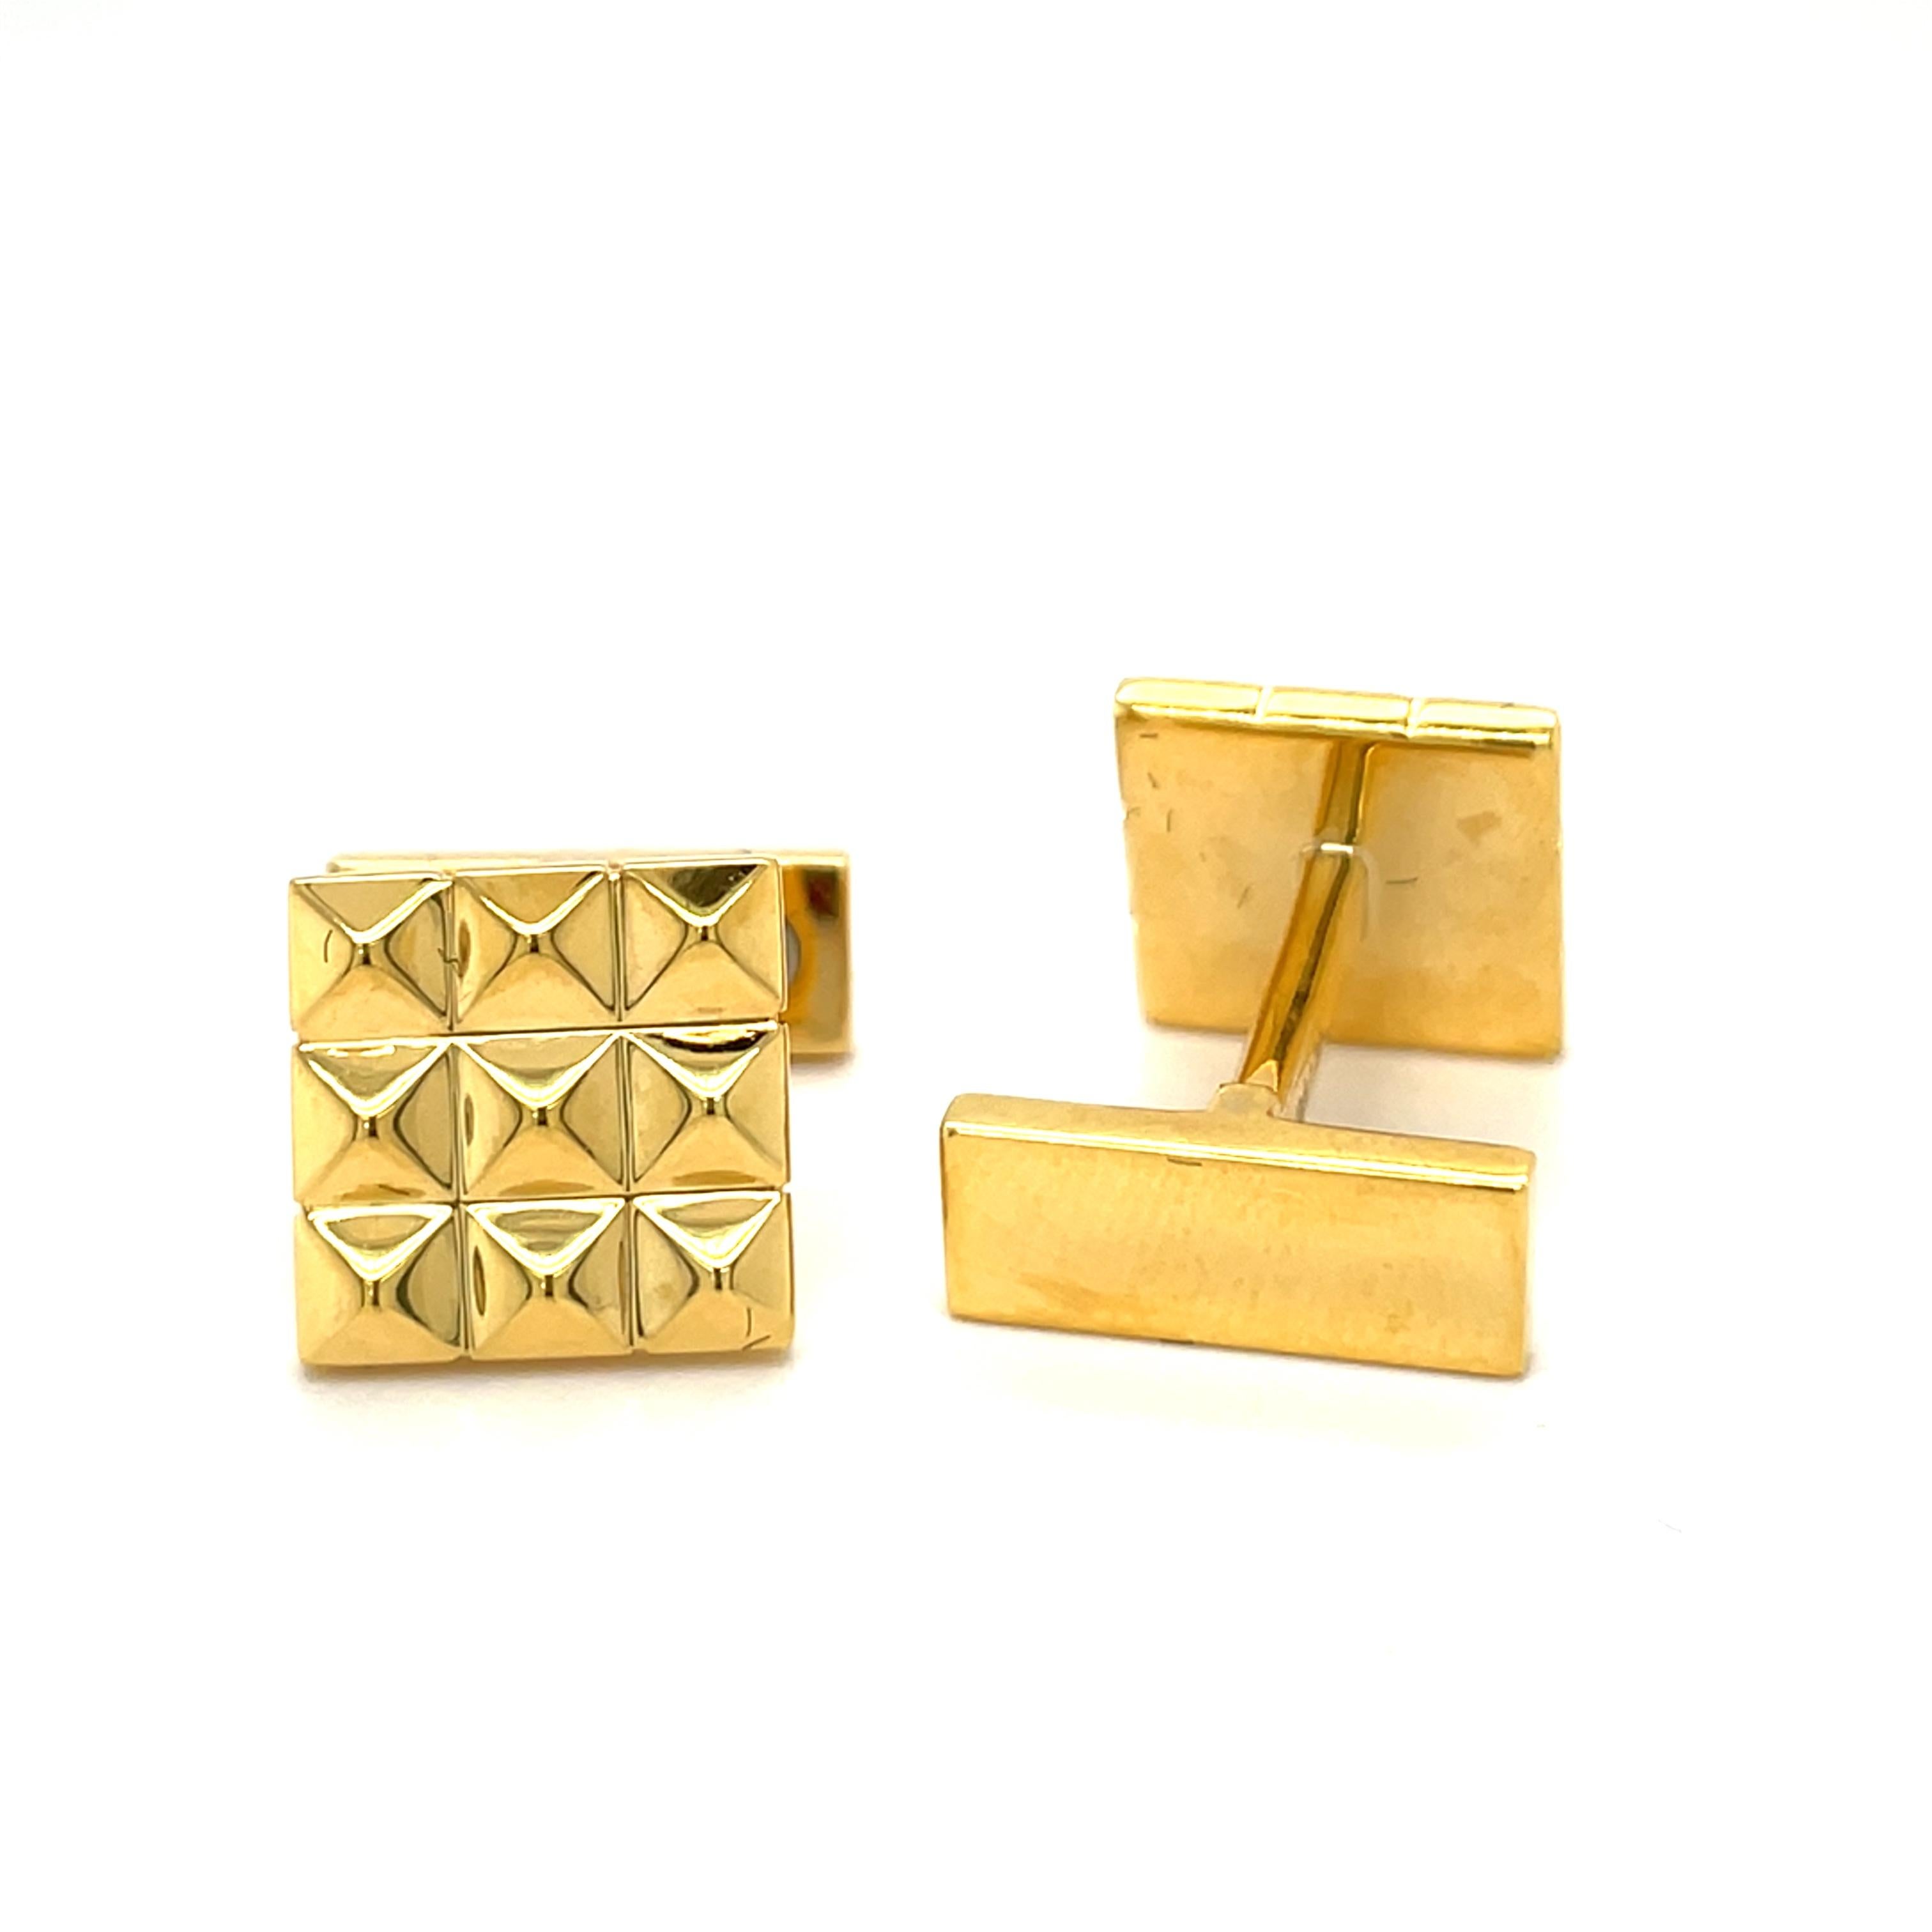 These 18K yellow gold unique cufflinks are from Timeless Collection. These very elegant cufflinks are made with yellow gold. Total metal weight is 18.00 gr. These cufflinks are a perfect upgrade to every look.
This collection of gold cufflinks is